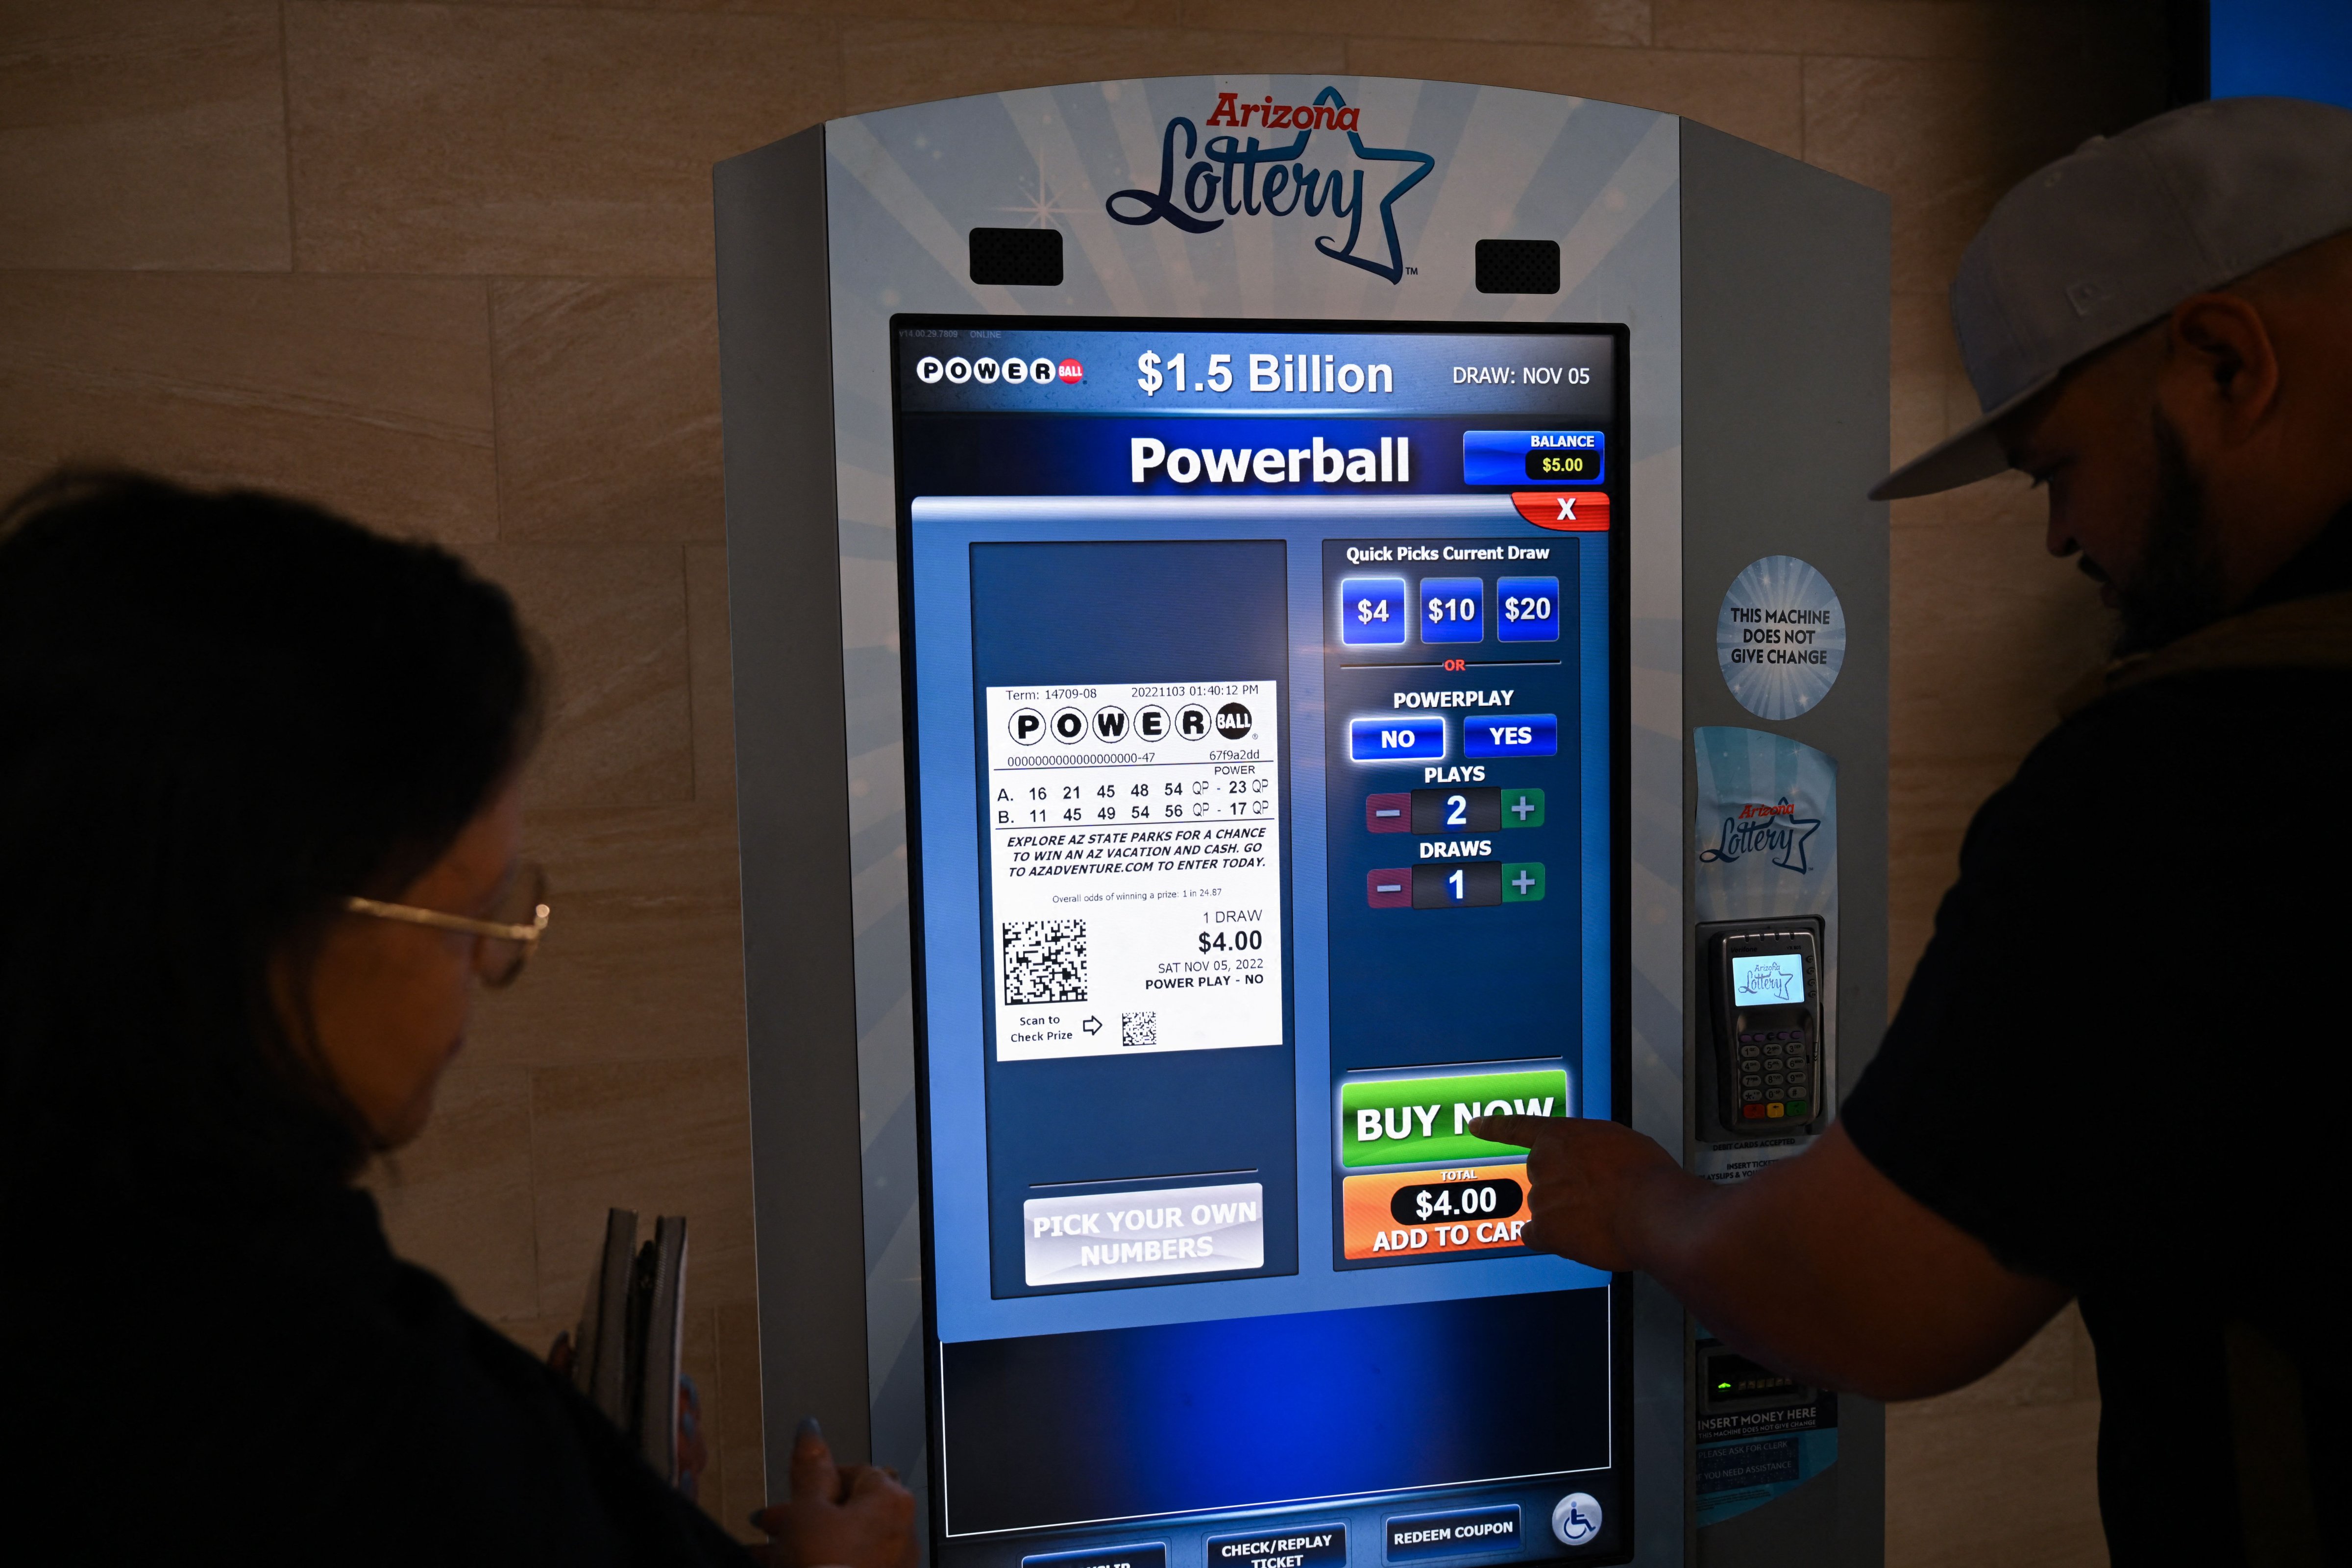 People purchase lottery tickets ahead of a PowerBall $1.5 Billon jackpot from a kiosk inside the Phoenix Sky Harbor International Airport (PHX) on November 3, 2022 in n Phoenix, Arizona. (Patrick T. Fallon—AFP/Getty Images)